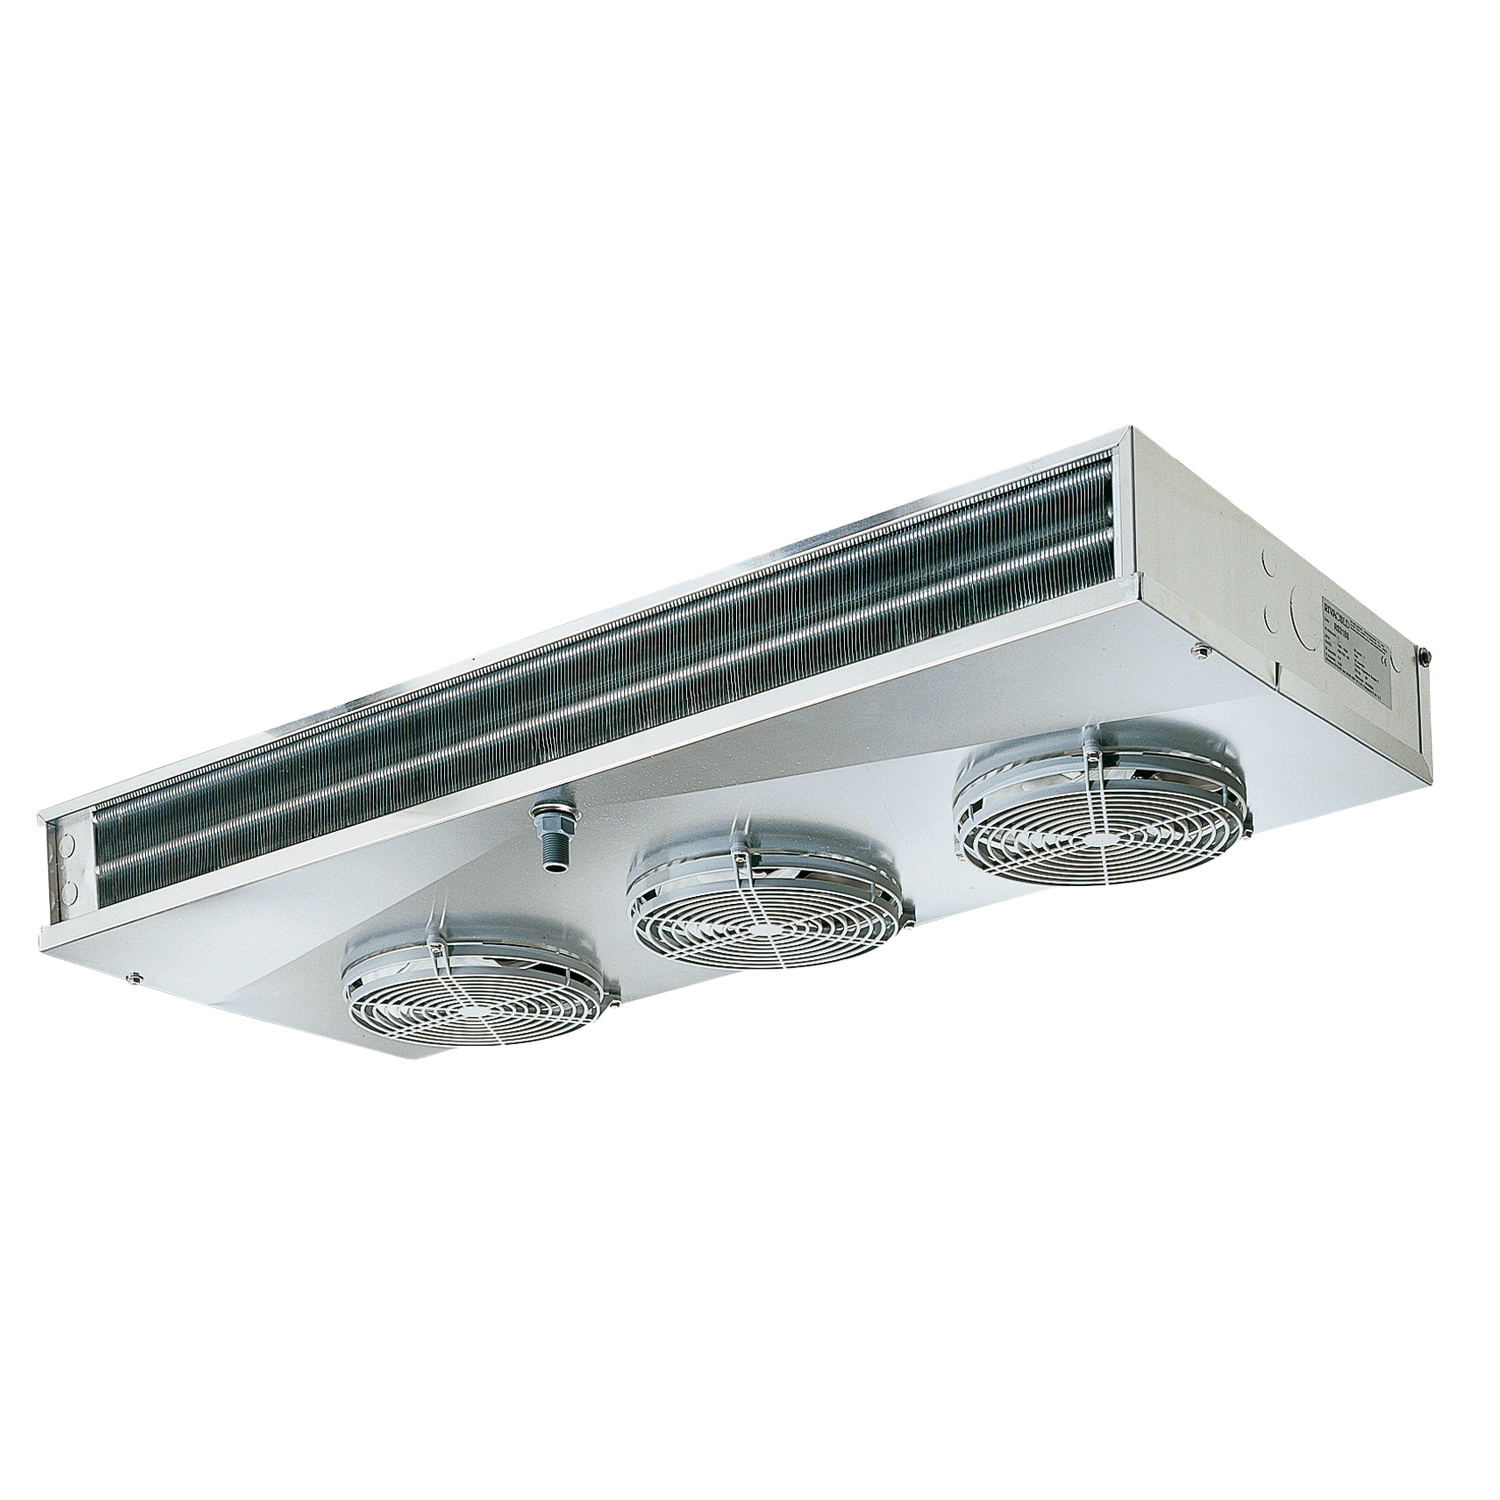 RSR: Flat ceiling evaporator with corrugated tubes